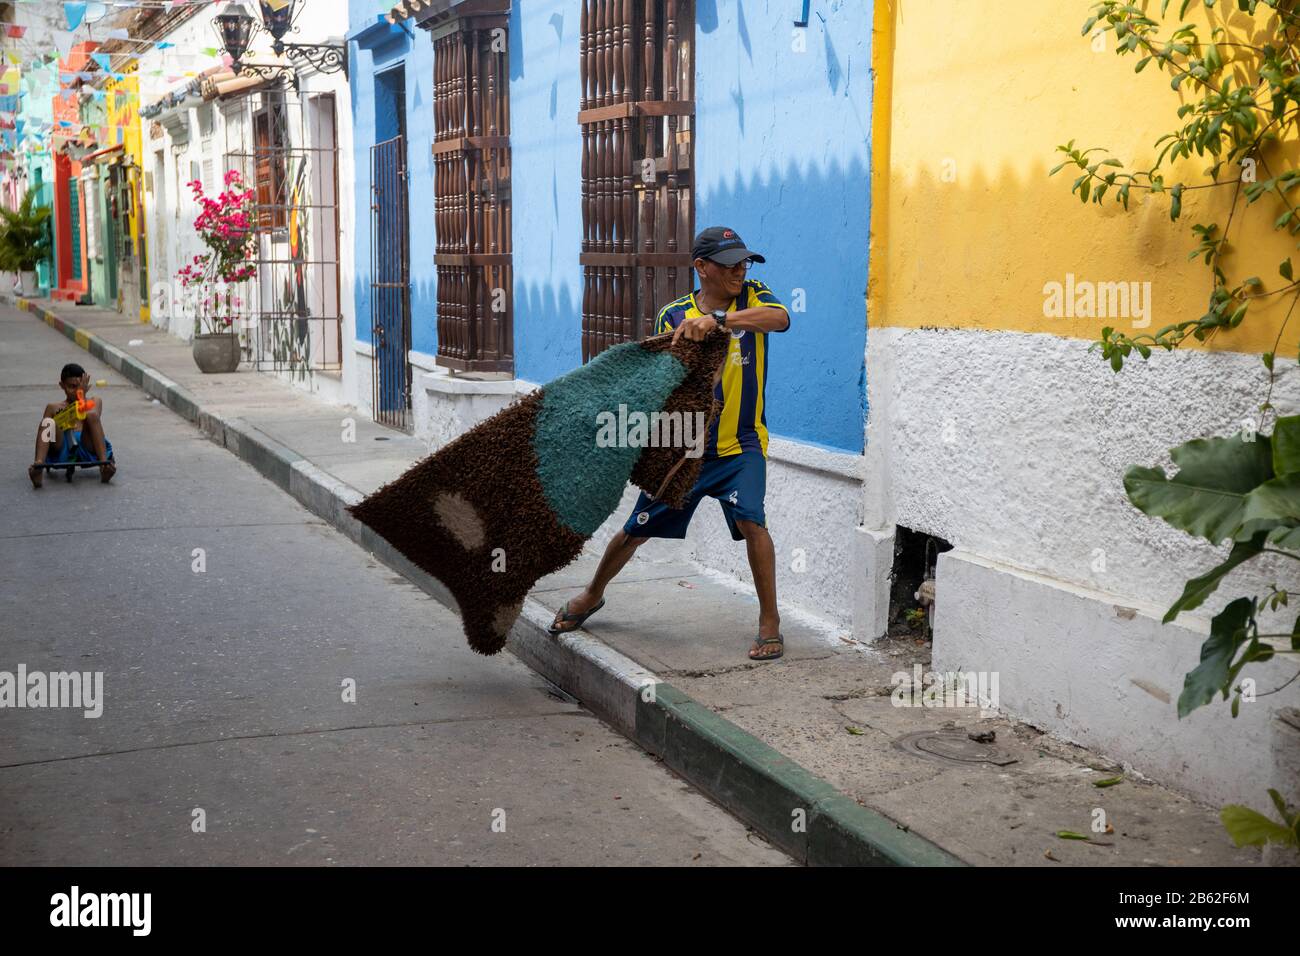 Life goes on in this busy tourist area in Getsemani, man cleaning the dust from a rug. Stock Photo